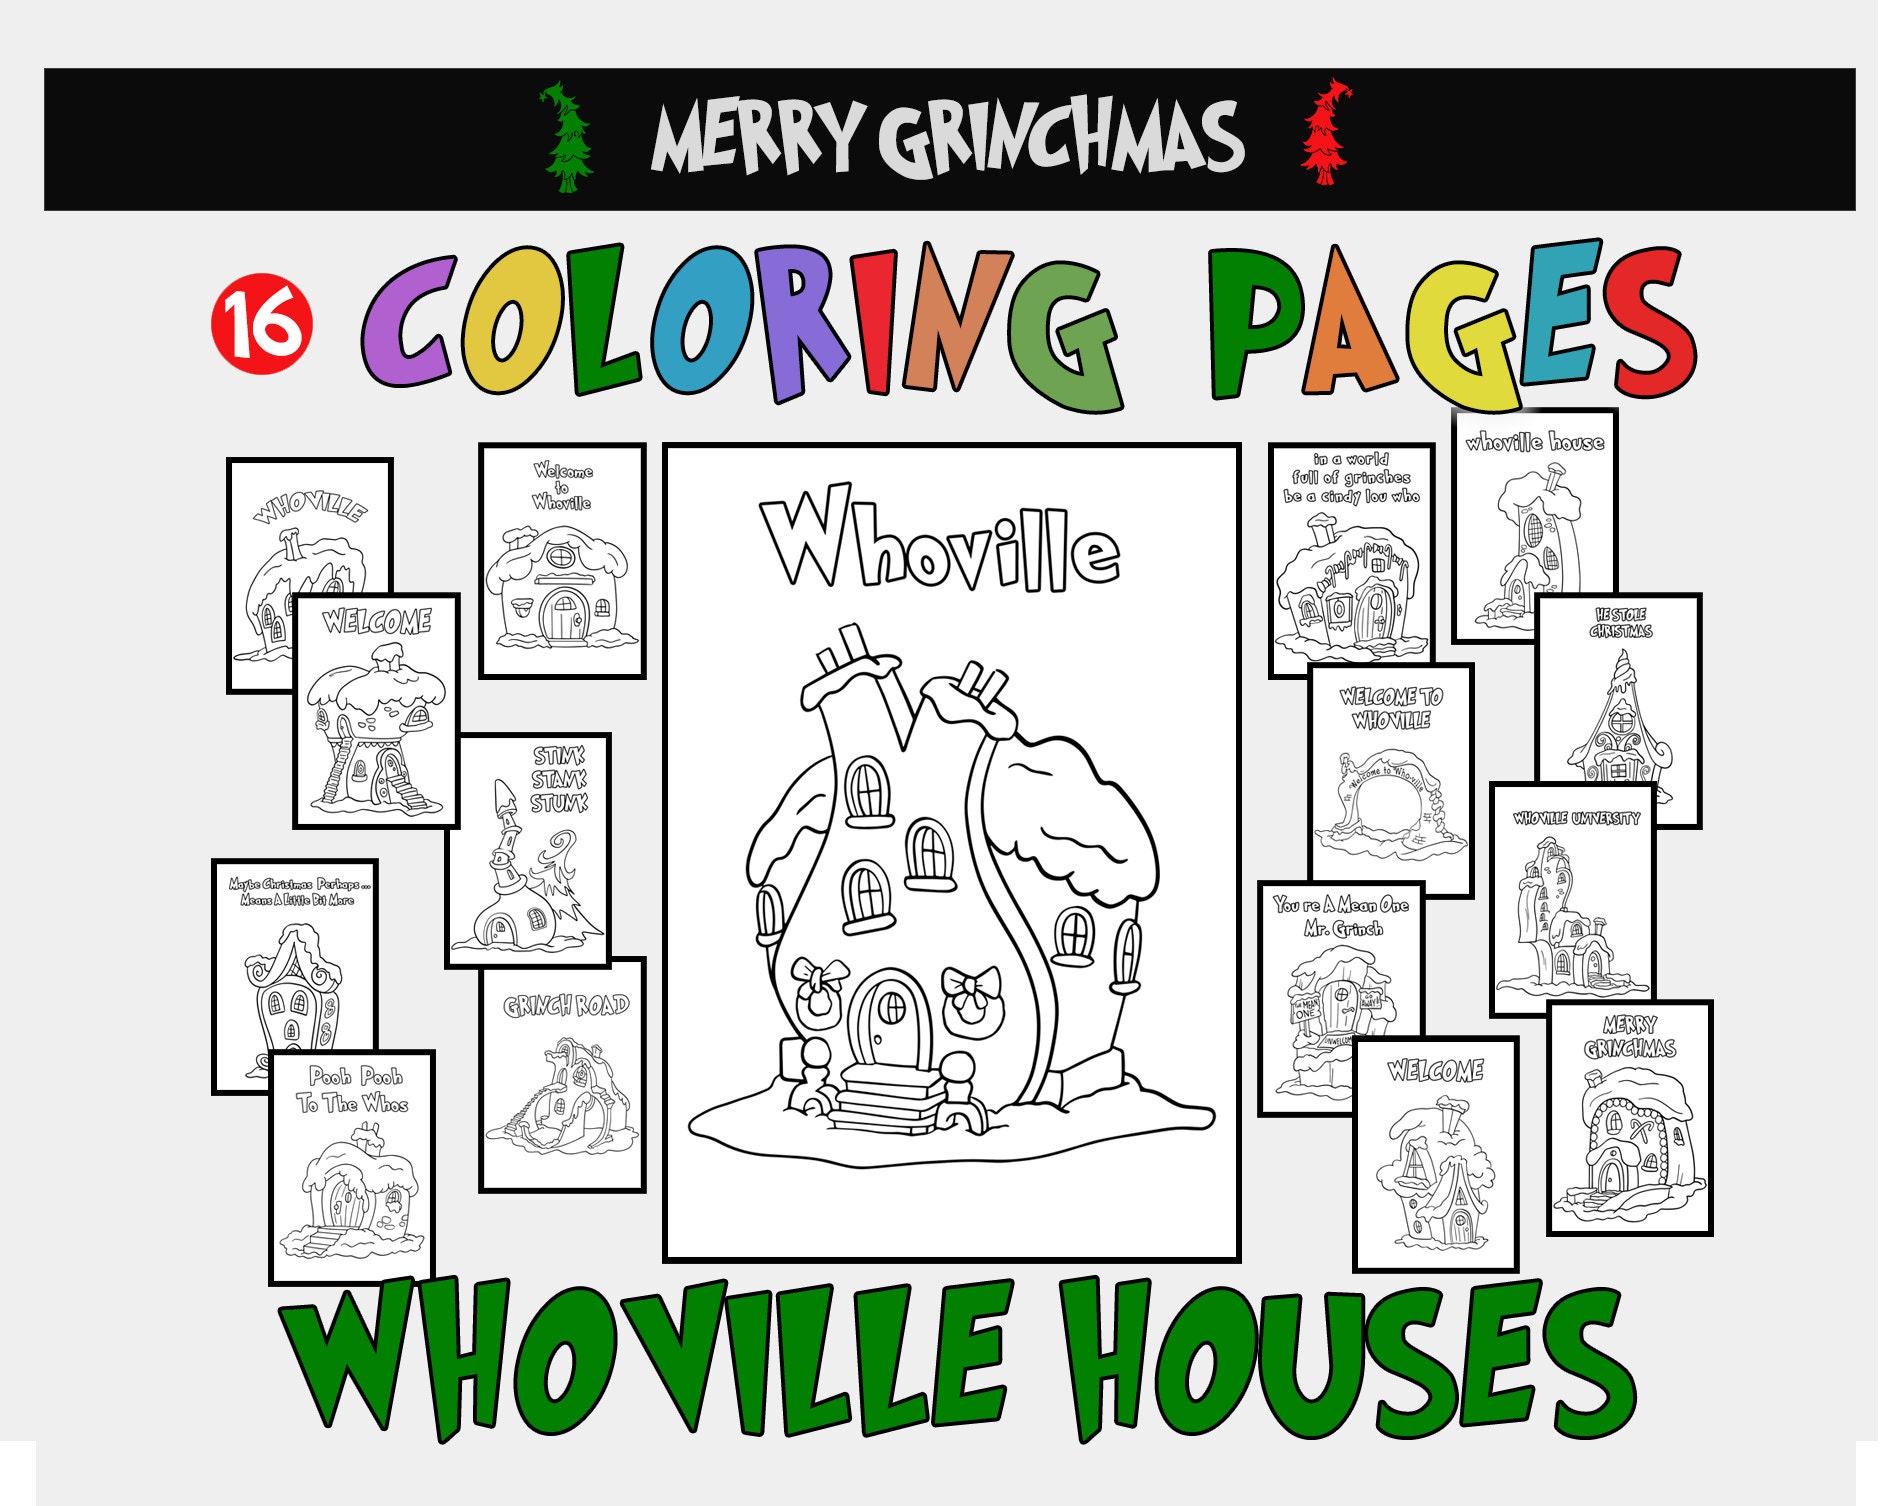 How to create a HTV Coloring Page [Free Cut File] 